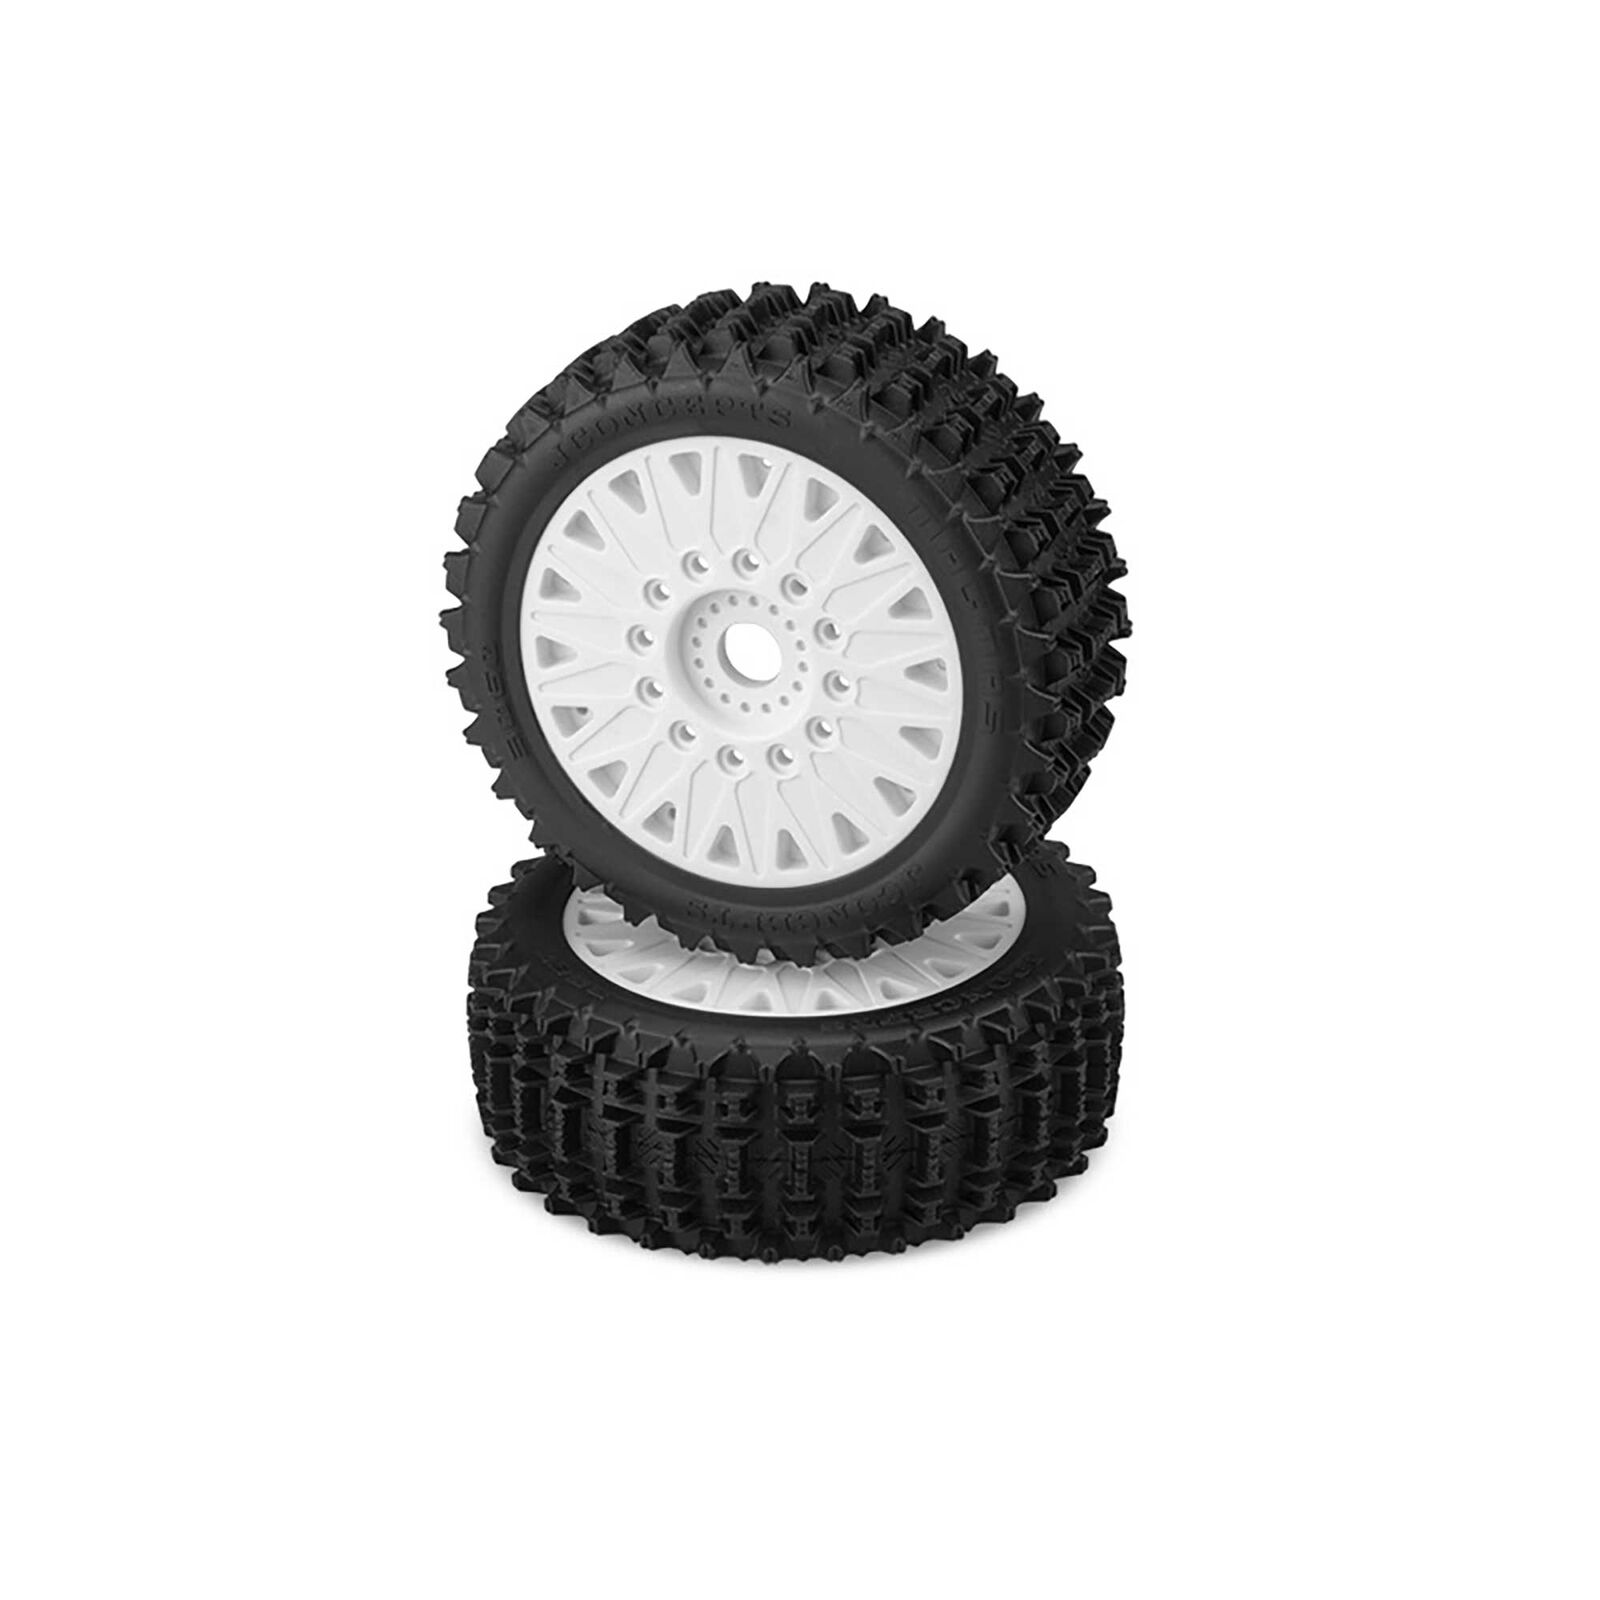 1/8 Magma 83mm Pre-Mounted 4x4 Buggy Tires, White Wheels, Yellow Compound (2)